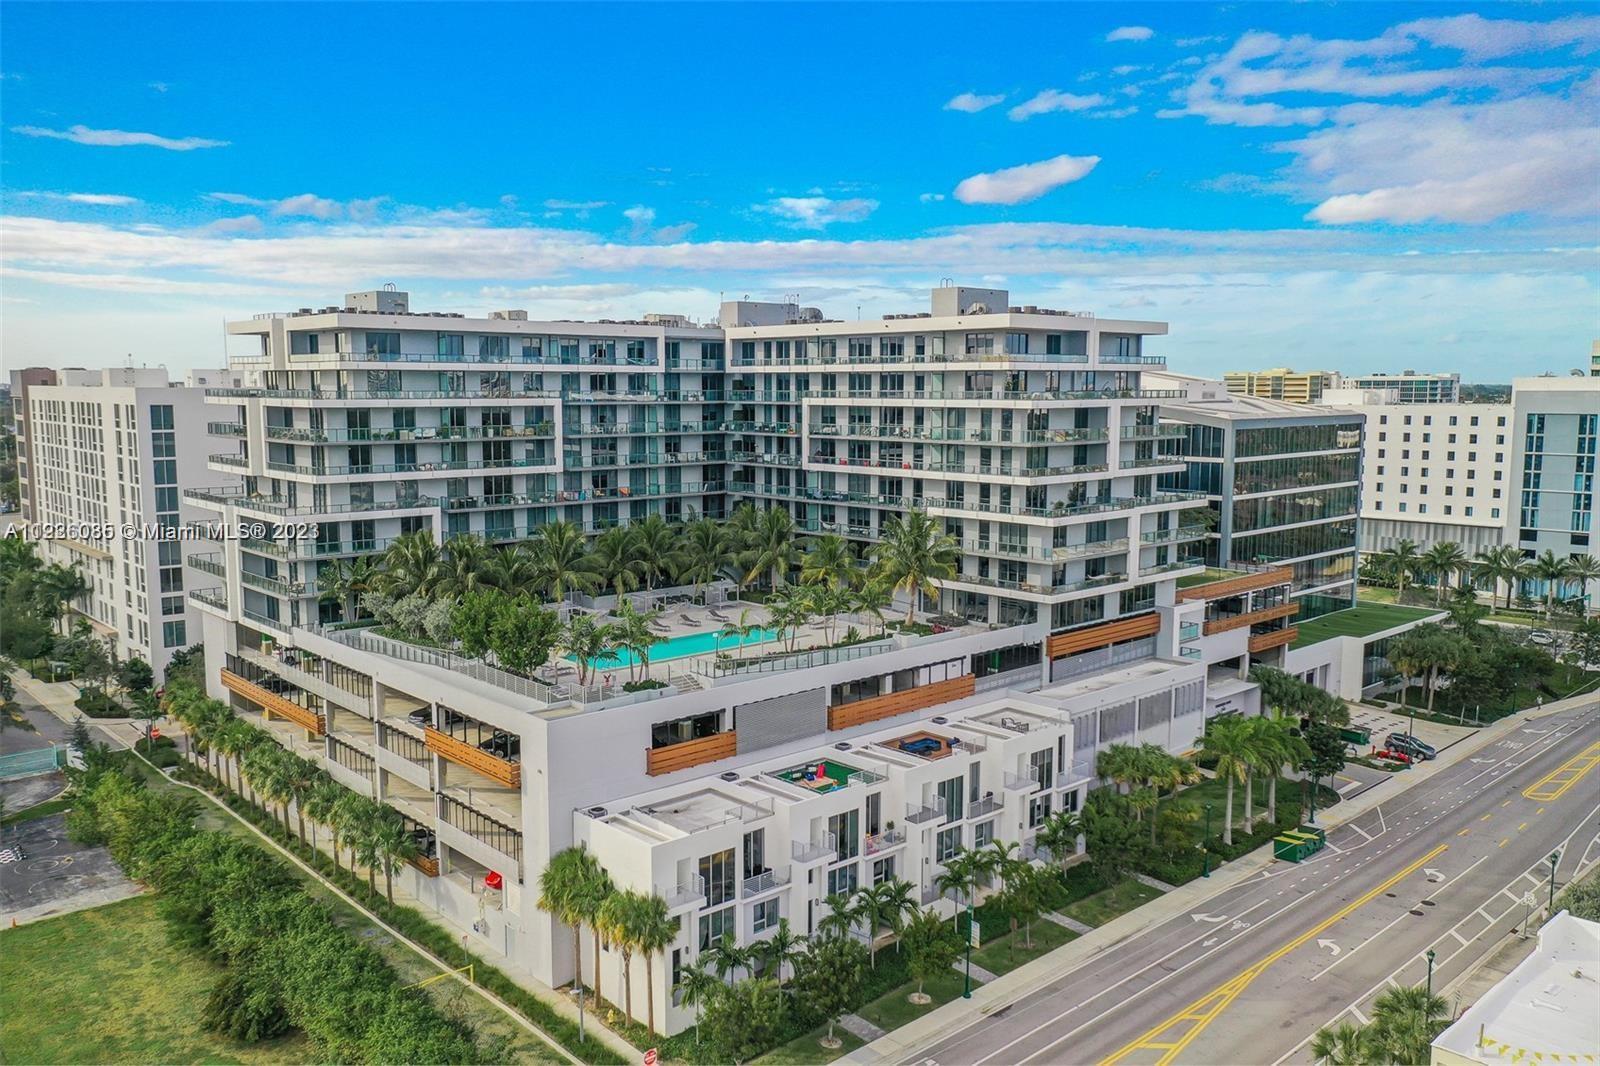 Investment opportunity!  Tenant in place!
2bed/2 bath + Den Residence in the new center of Aventura